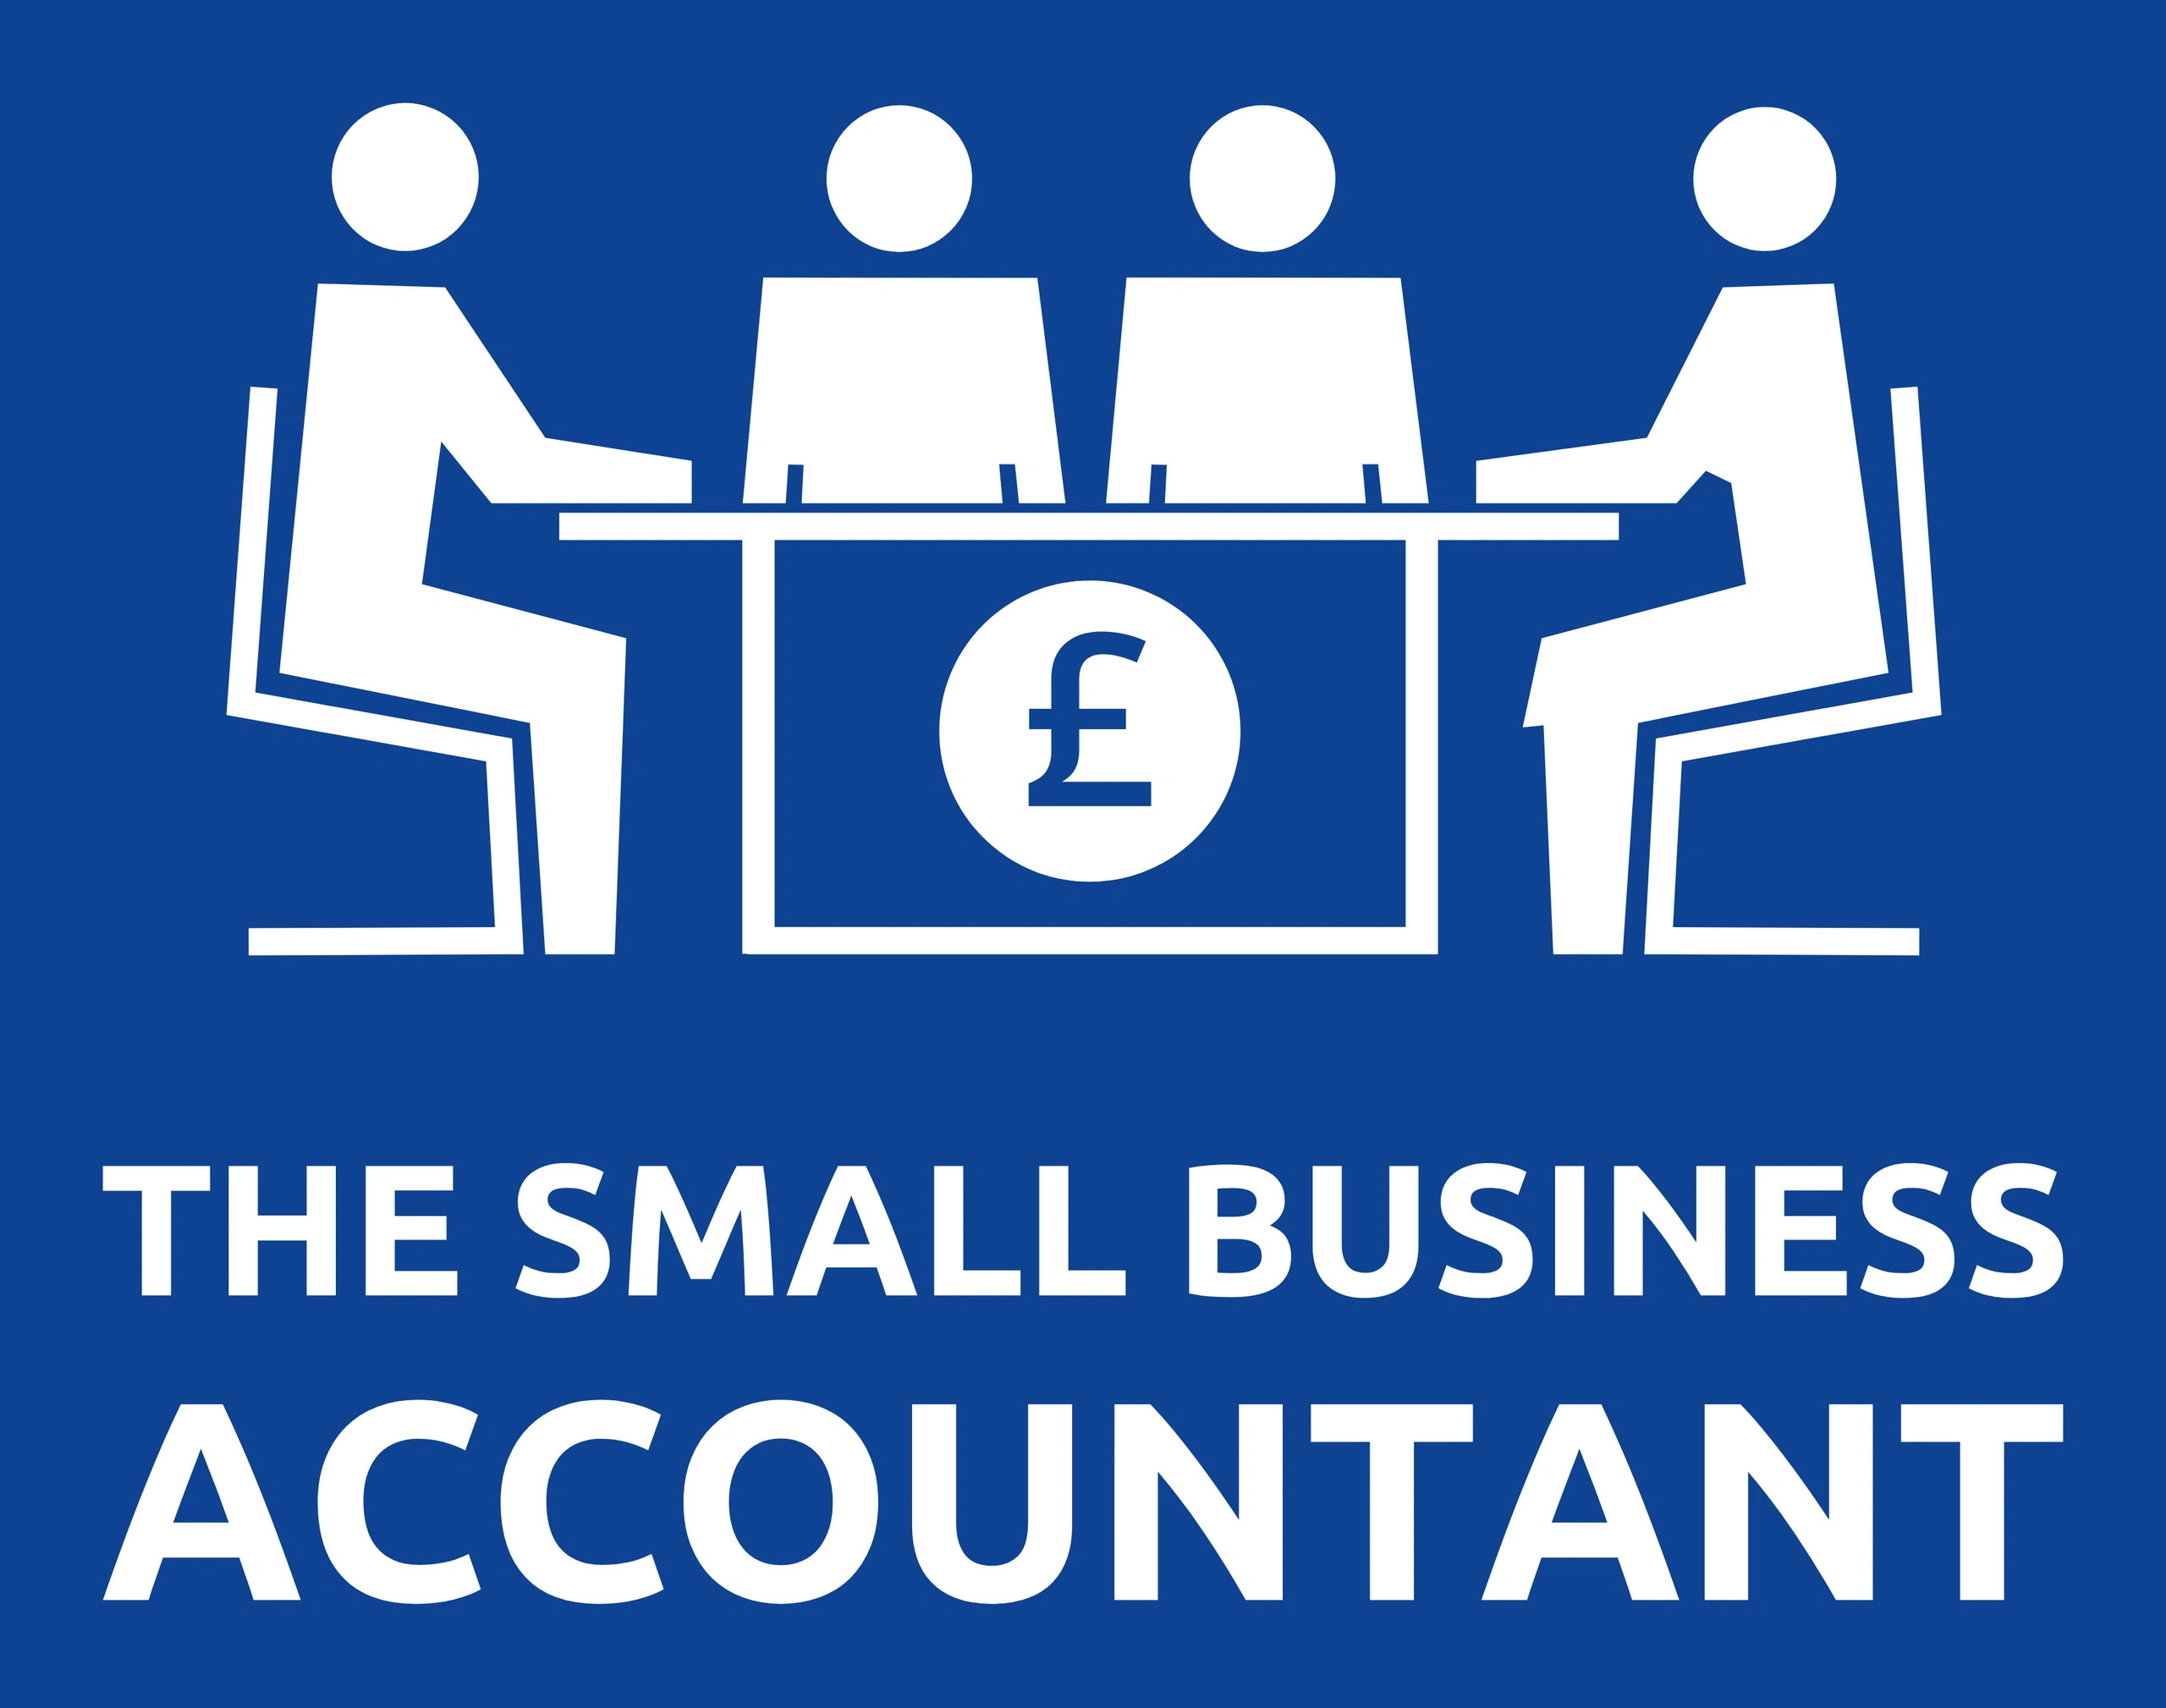 The Small Business Accountant